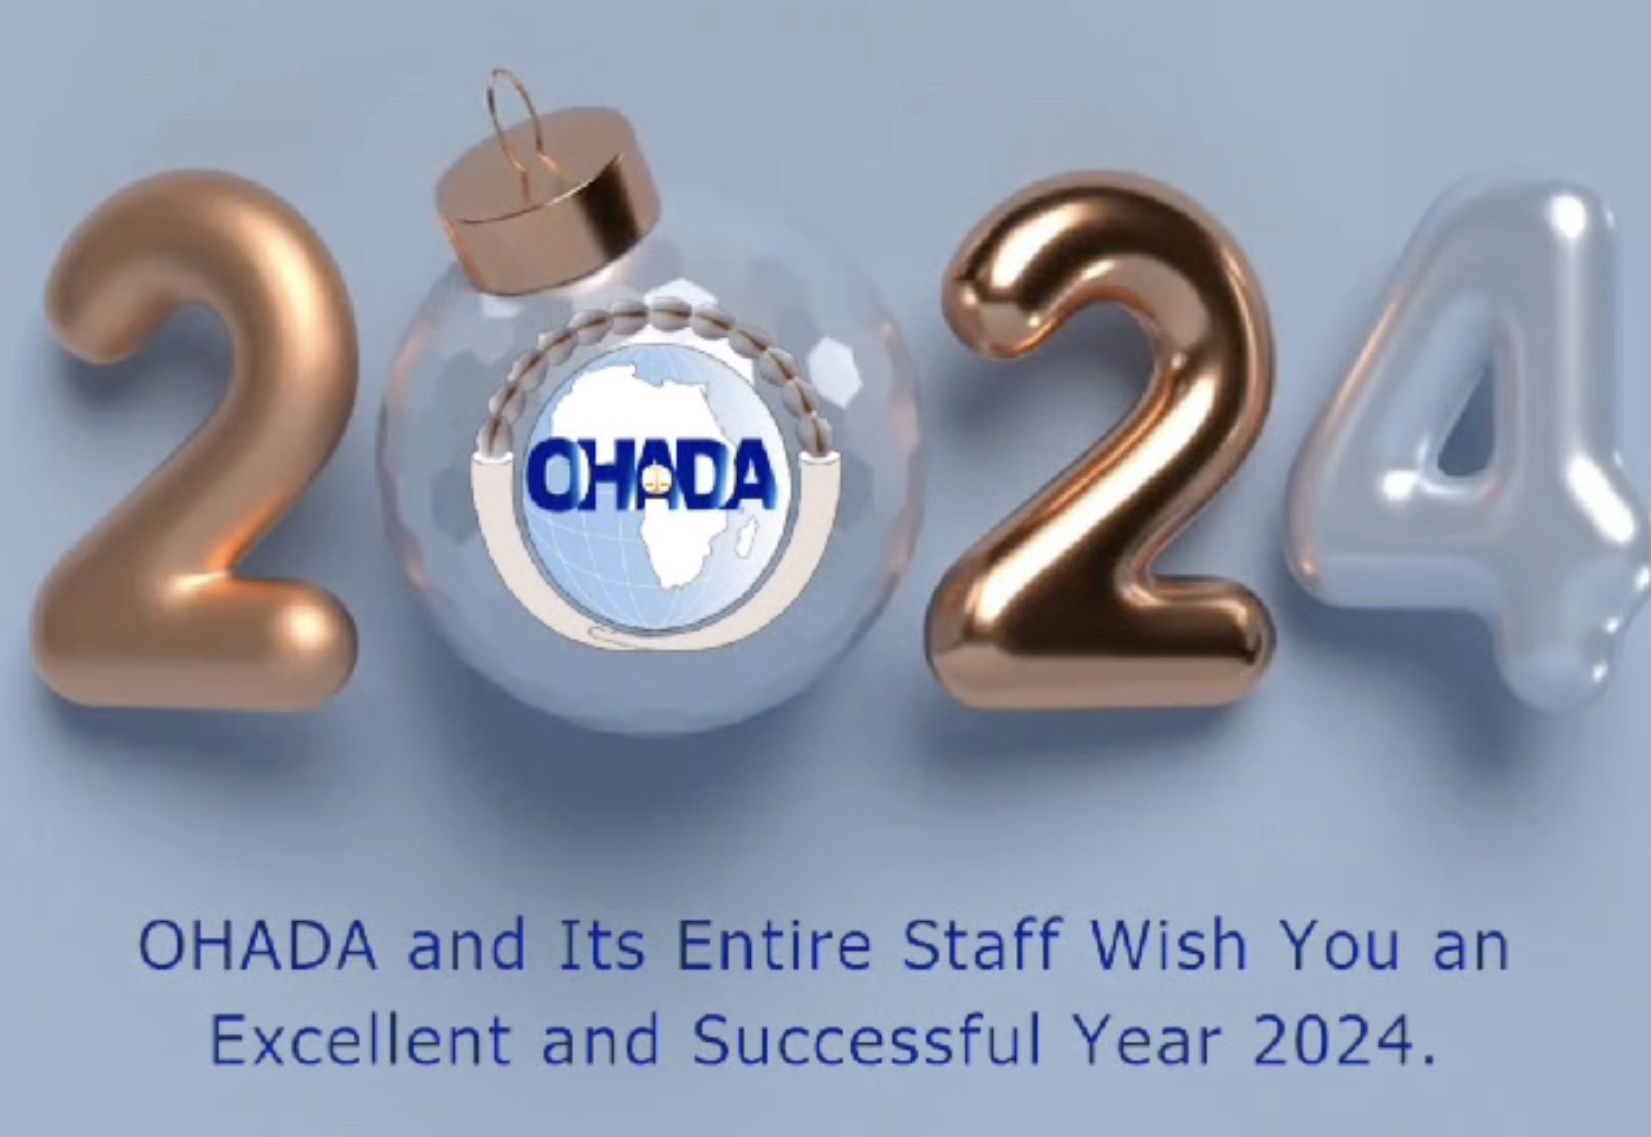 OHADA and Its Entire Staff Wish You an Excellent and Successful Year 2024.